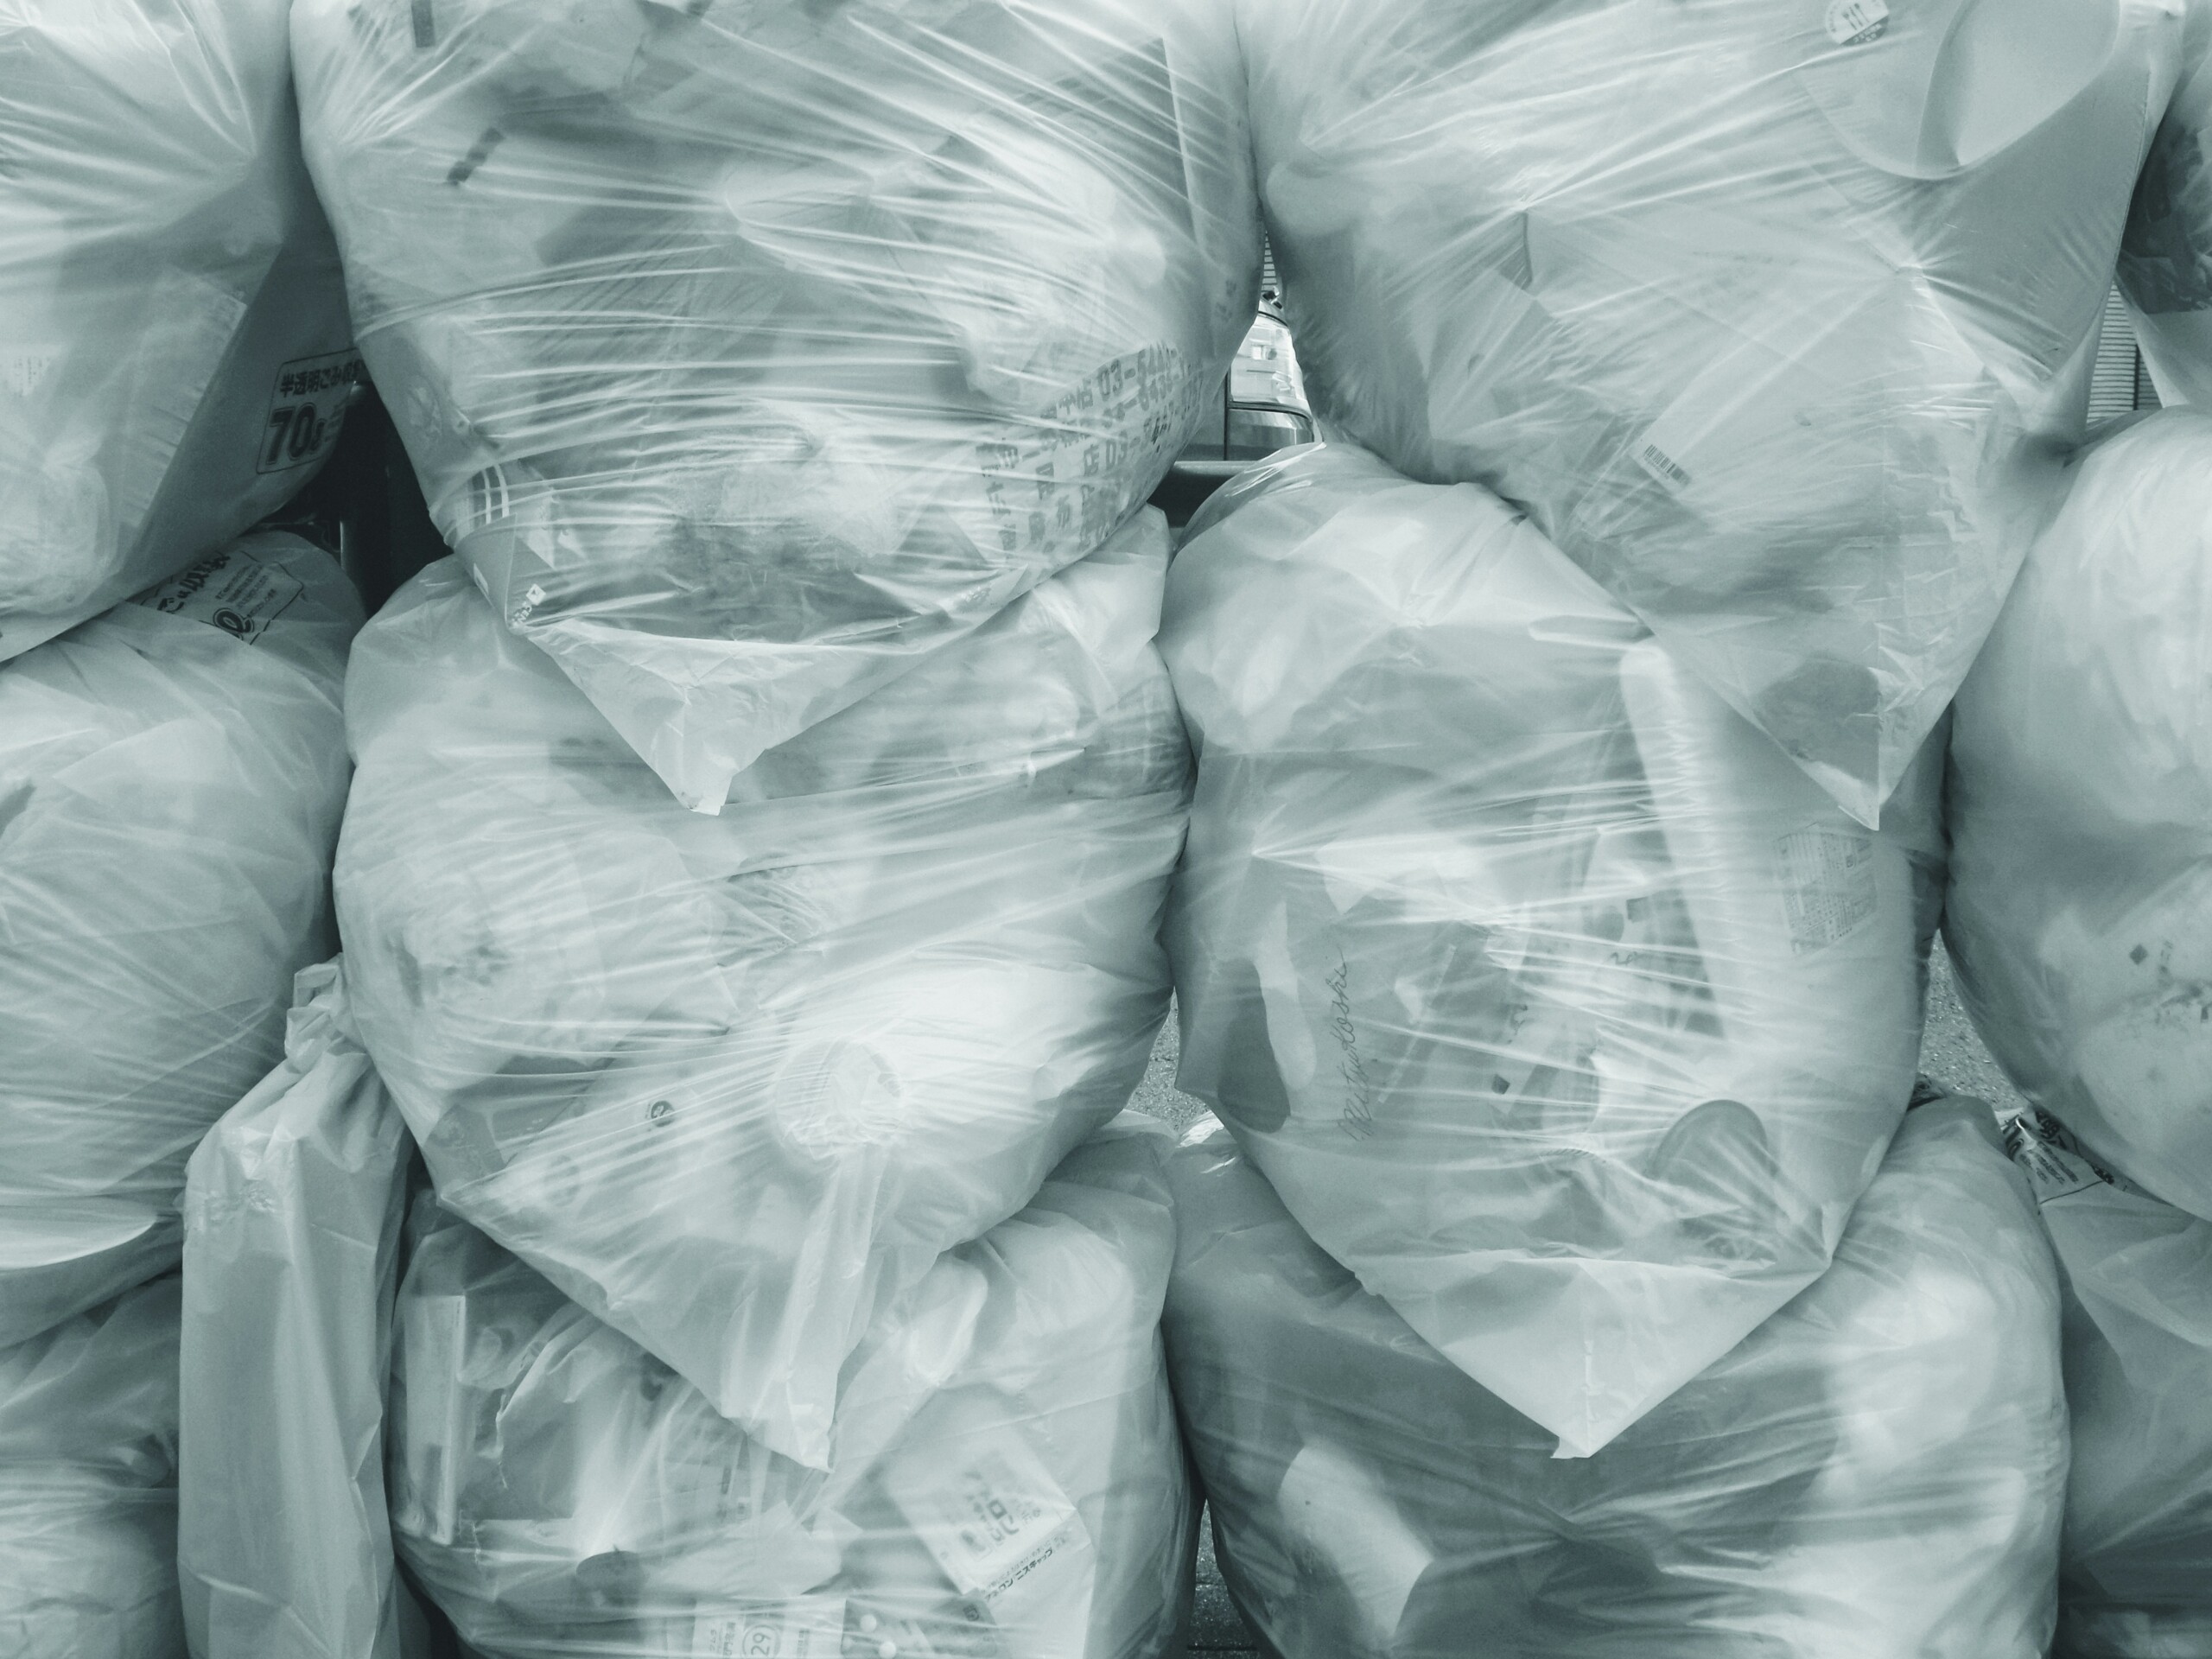 LEADING THE WAY IN WASTE REDUCTION FOR SUSTAINABLE MANUFACTURING